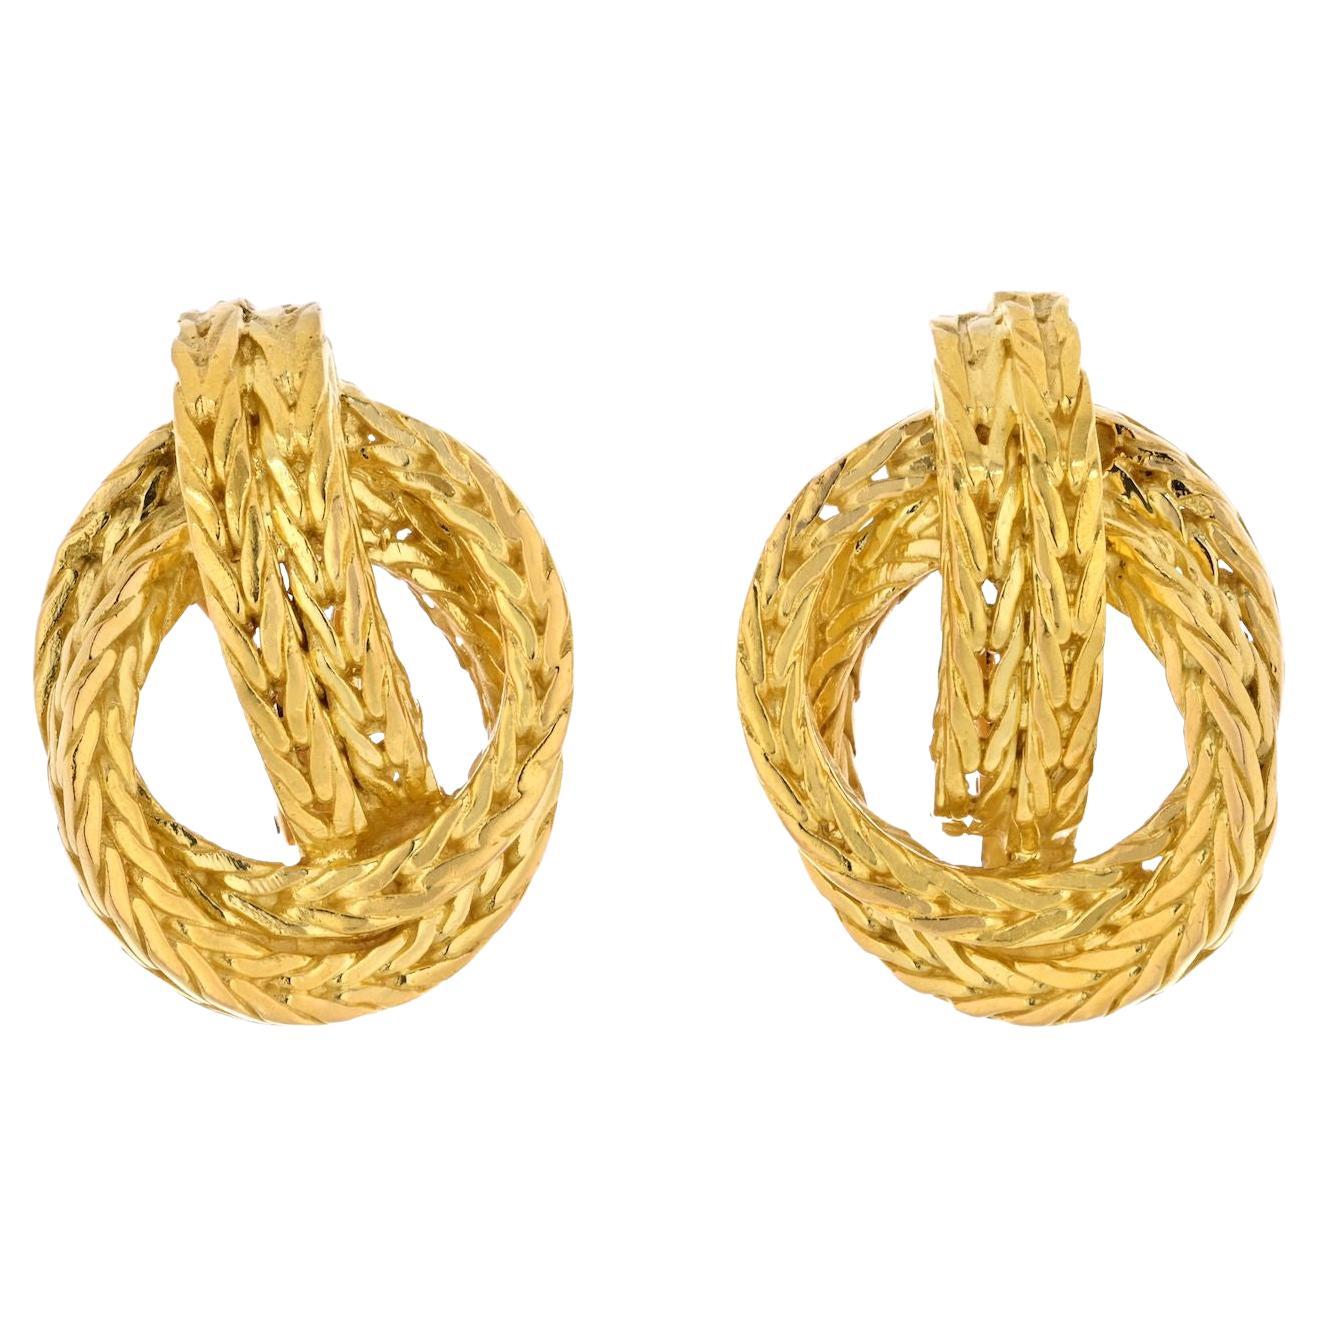 Hermes 18K Yellow Gold the Knot Style Earrings